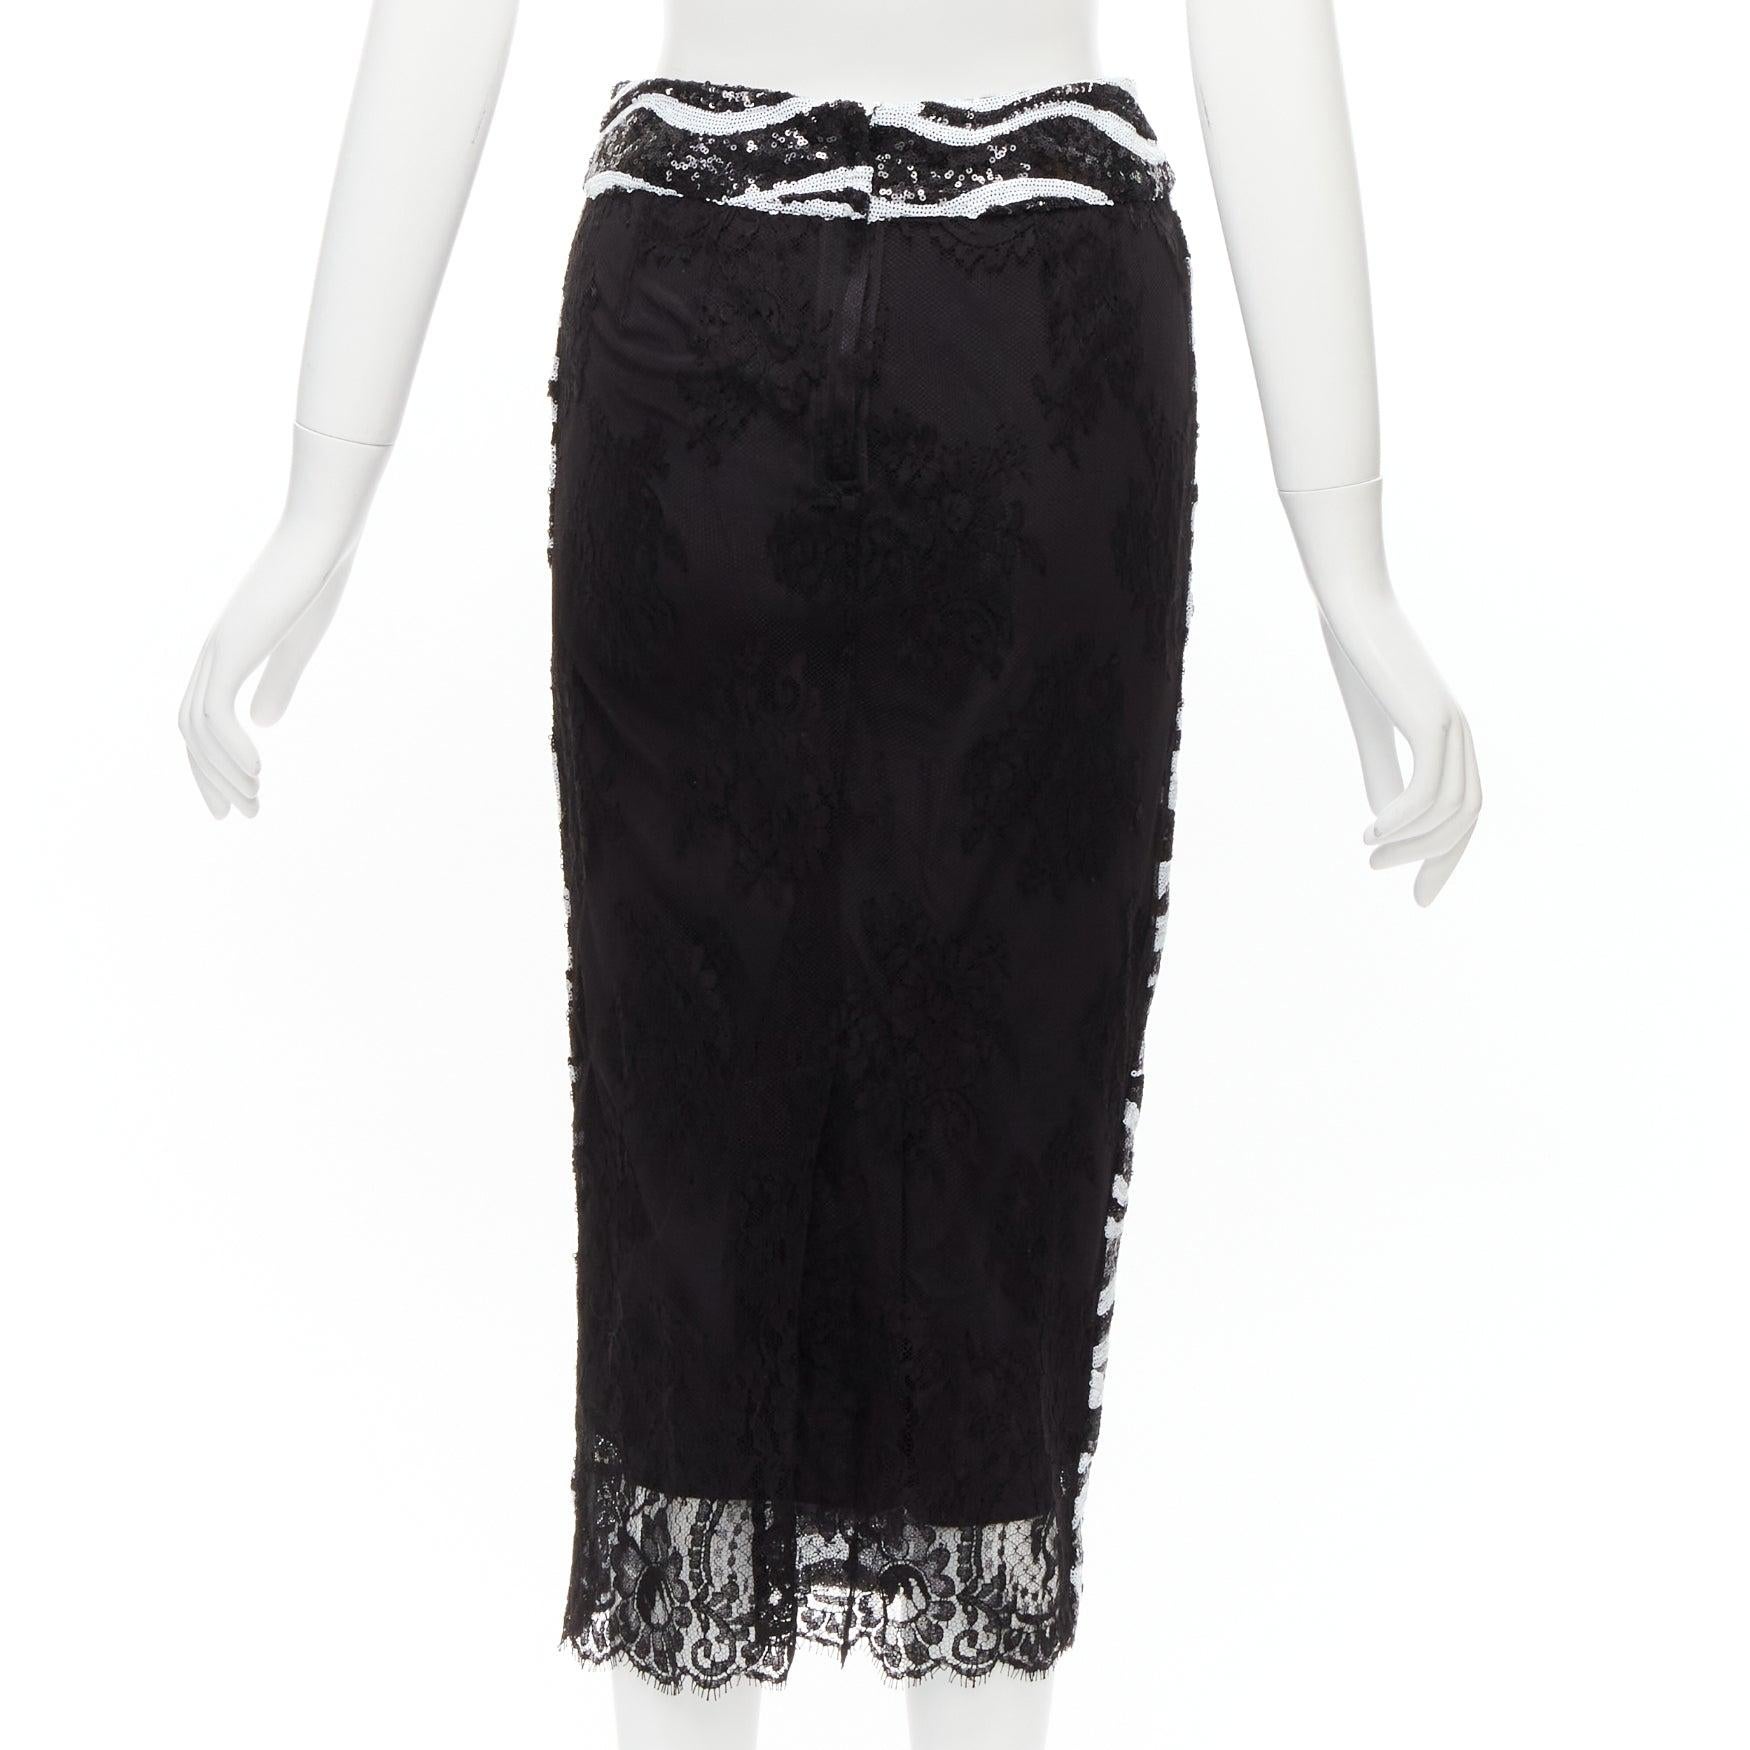 DOLCE GABBANA 2022 black white zebra sequins chantilly lace back pencil skirt IT38 XS
Reference: AAWC/A00542
Brand: Dolce Gabbana
Designer: Domenico Dolce and Stefano Gabbana
Material: Polyester, Blend
Color: Black, White
Pattern: Solid
Closure: